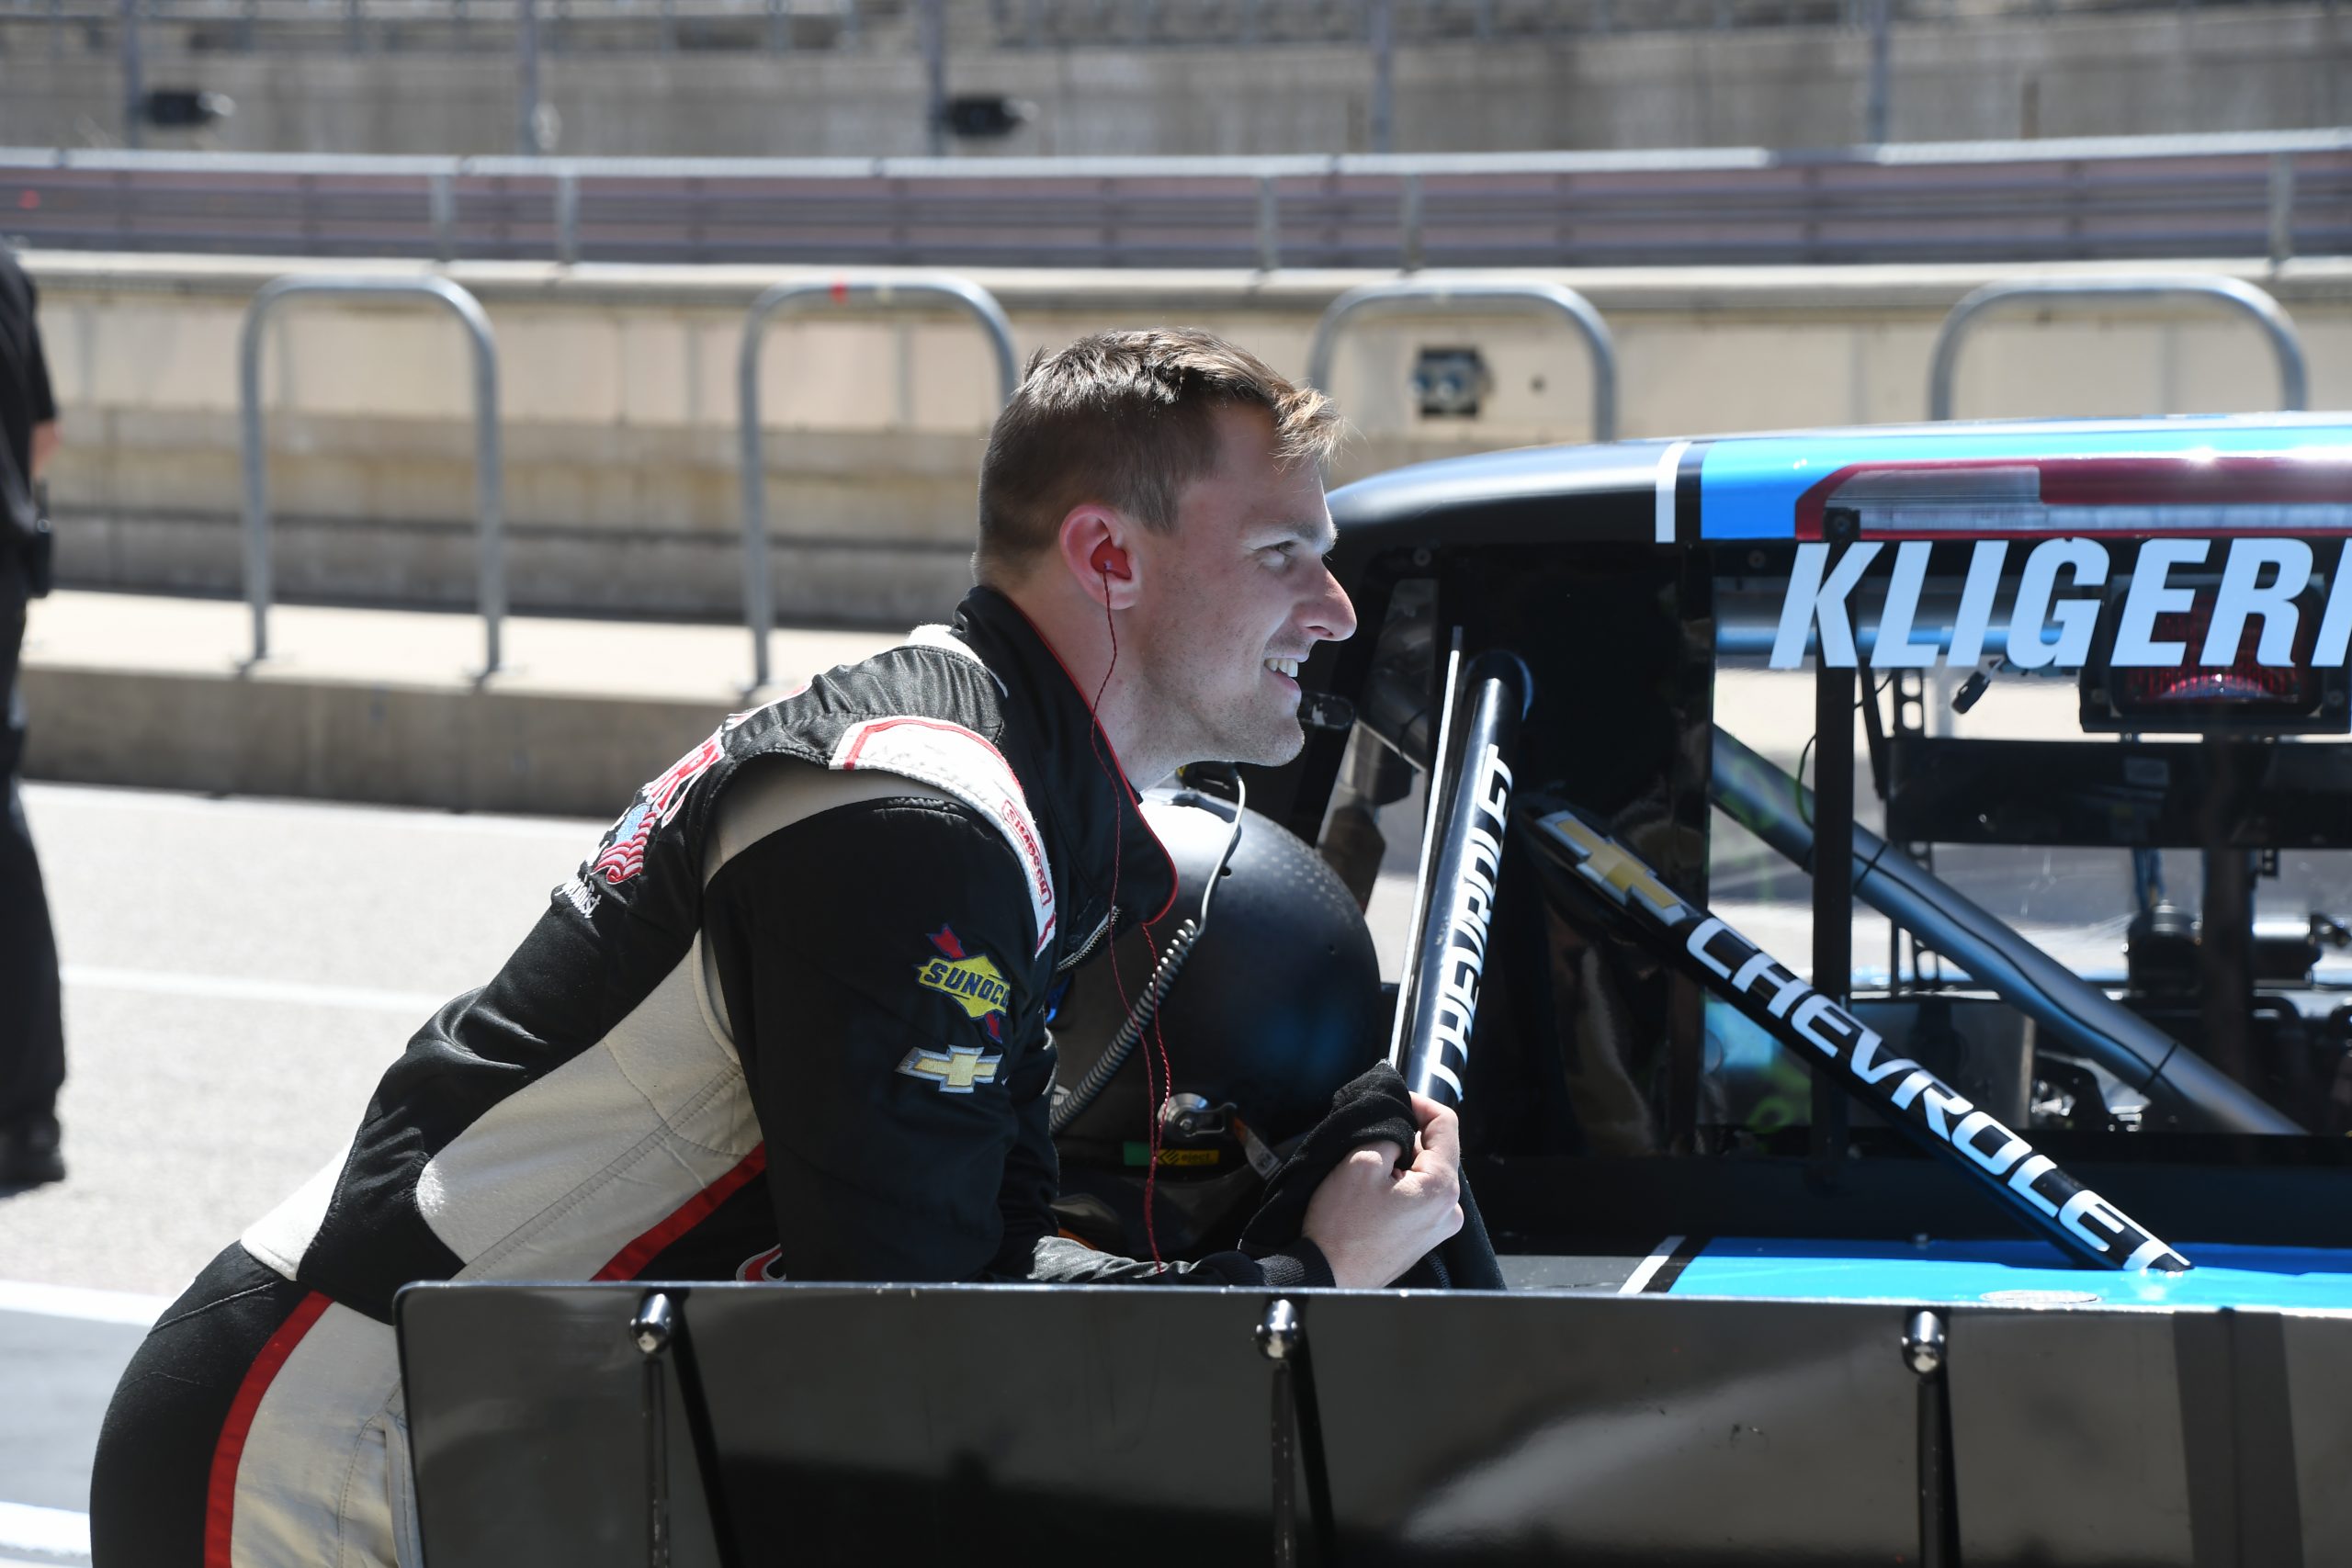 Parker Kligerman scored another solid result in his part-time Truck schedule. (Photo: Sean Folsom | The Podium Finish)